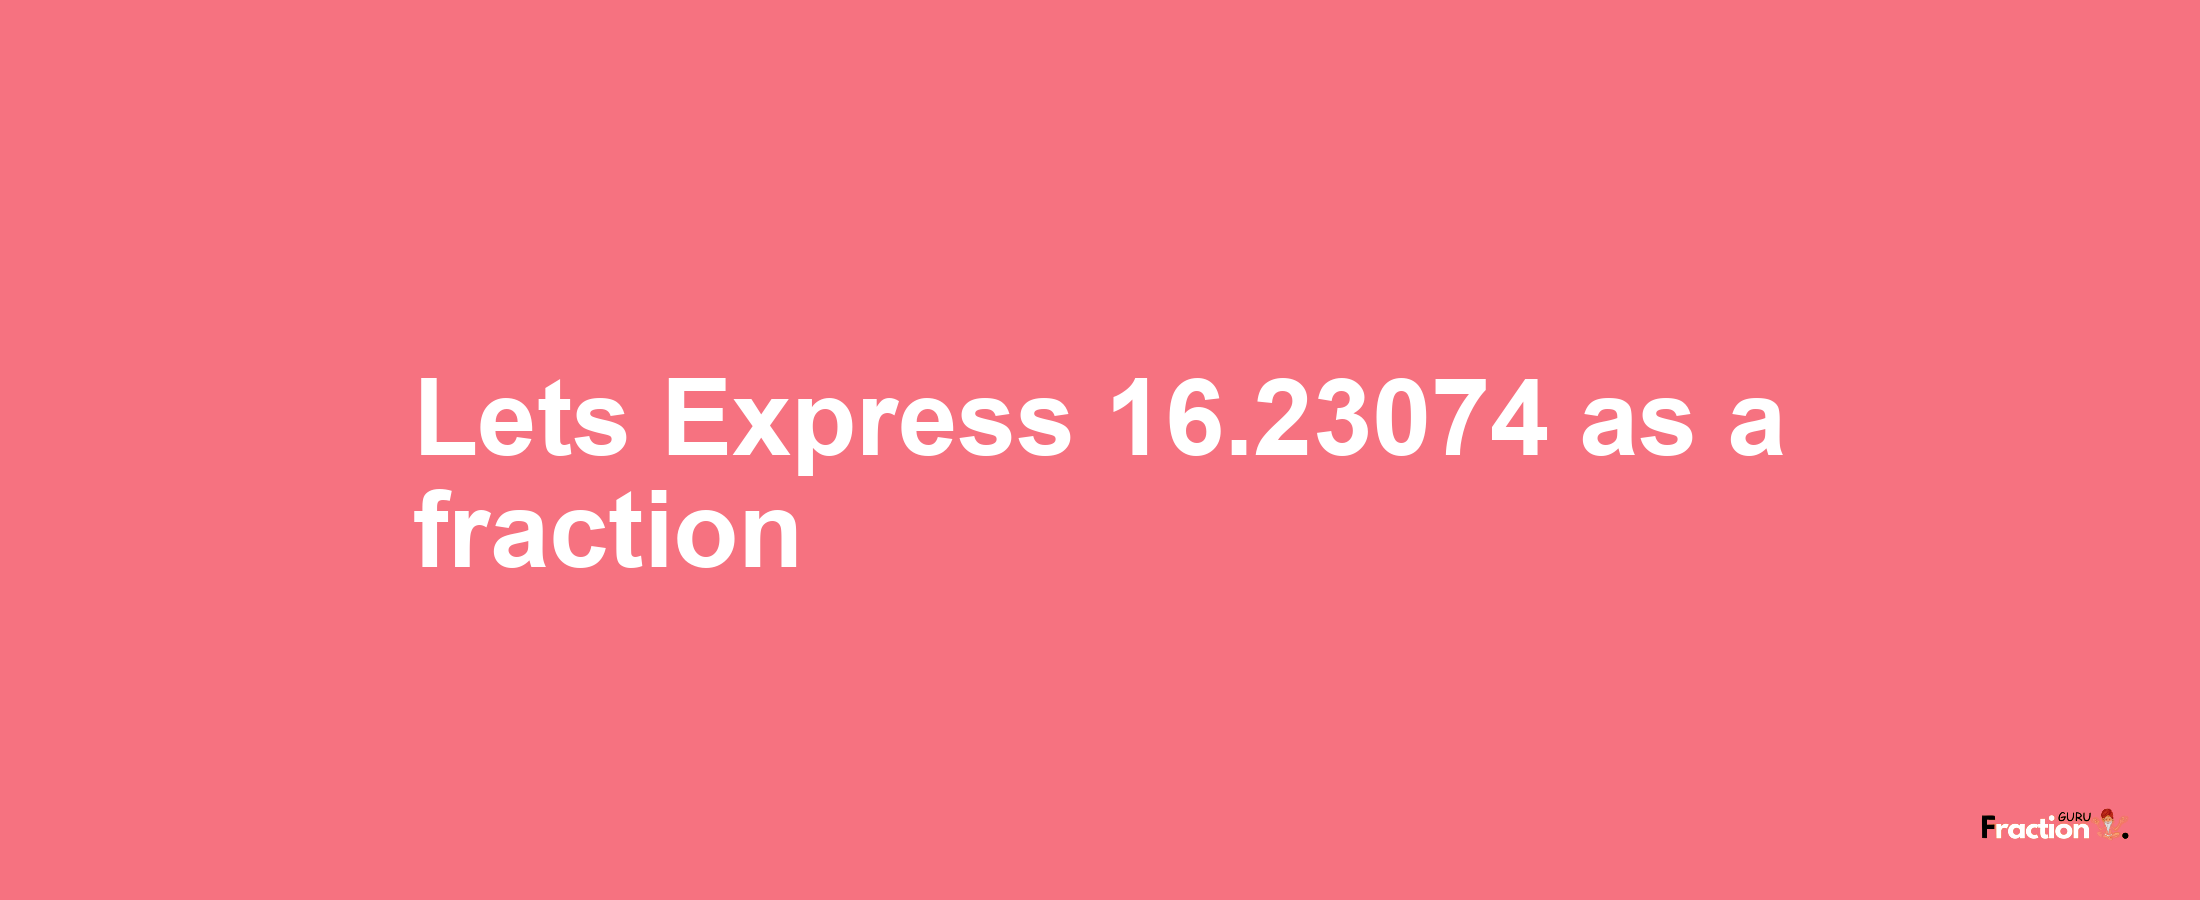 Lets Express 16.23074 as afraction